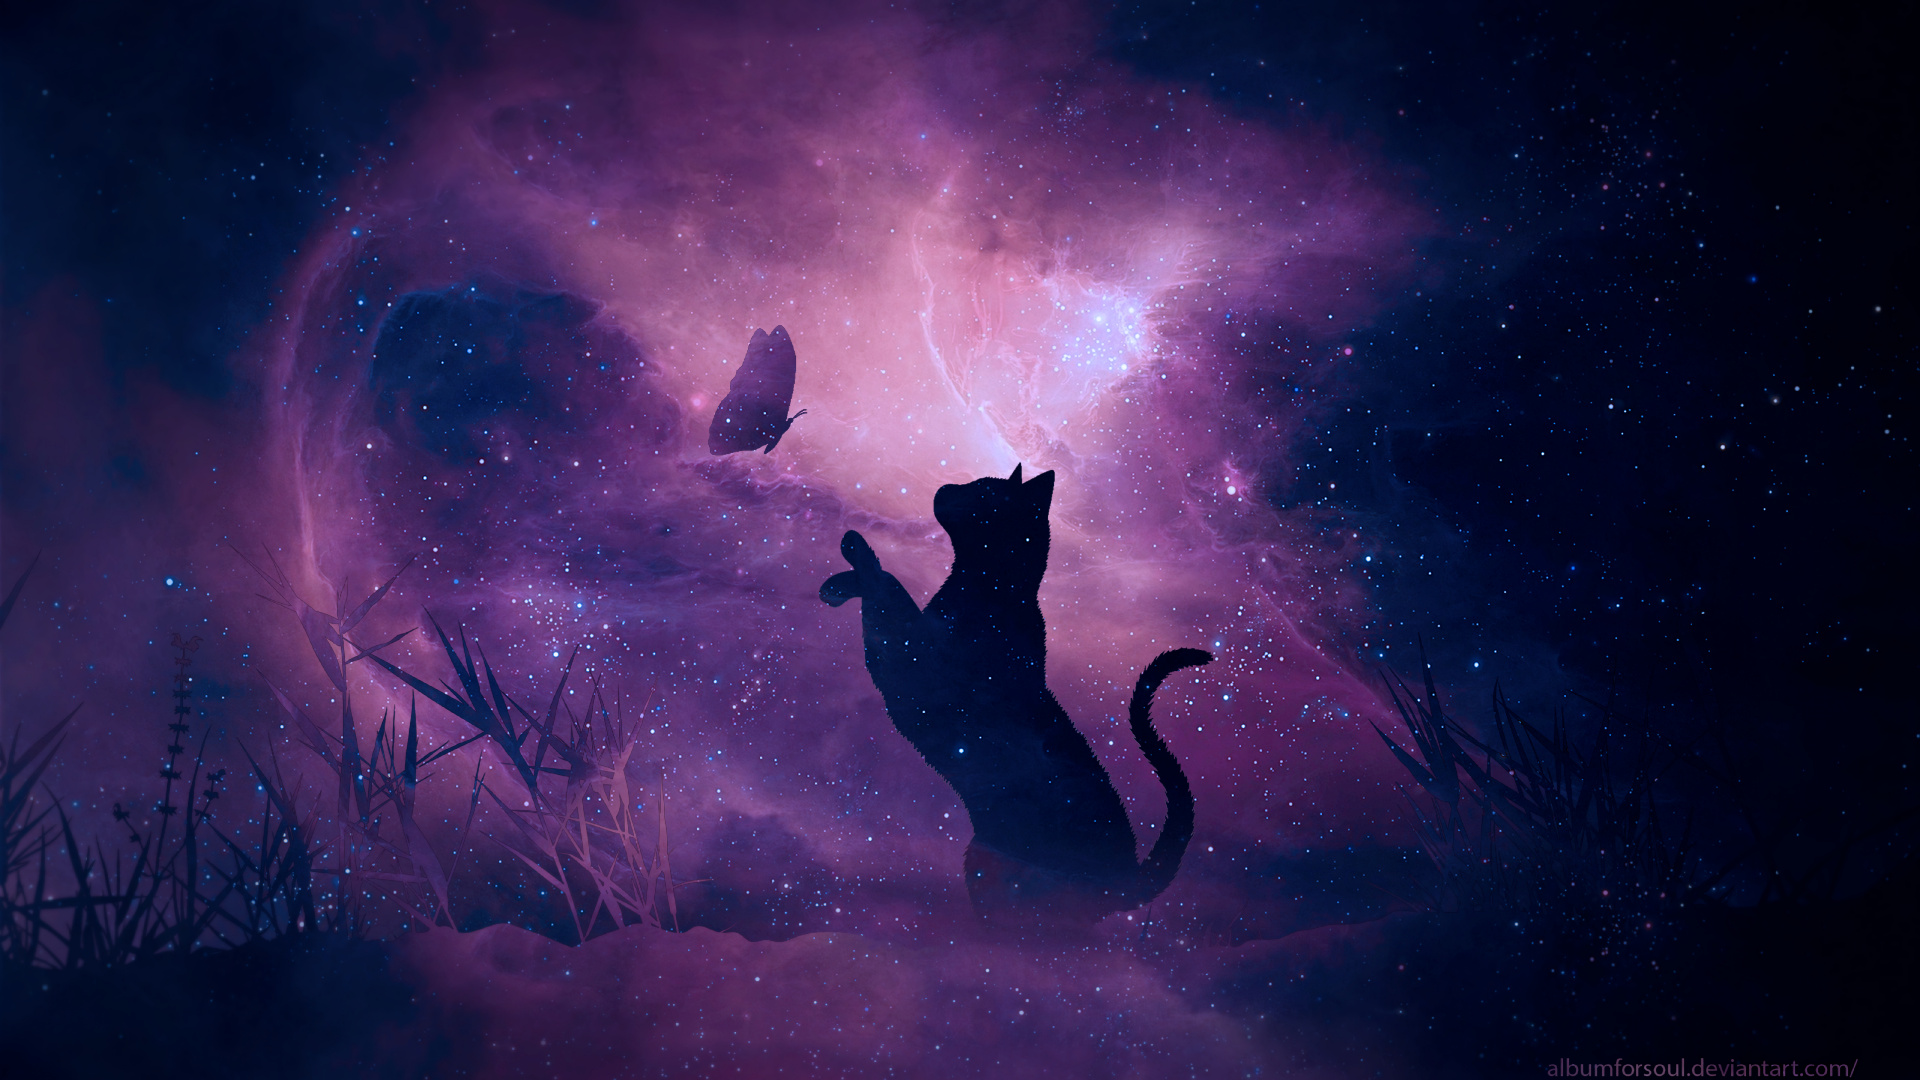 Black Cat on Grass Field During Night Time. Wallpaper in 1920x1080 Resolution